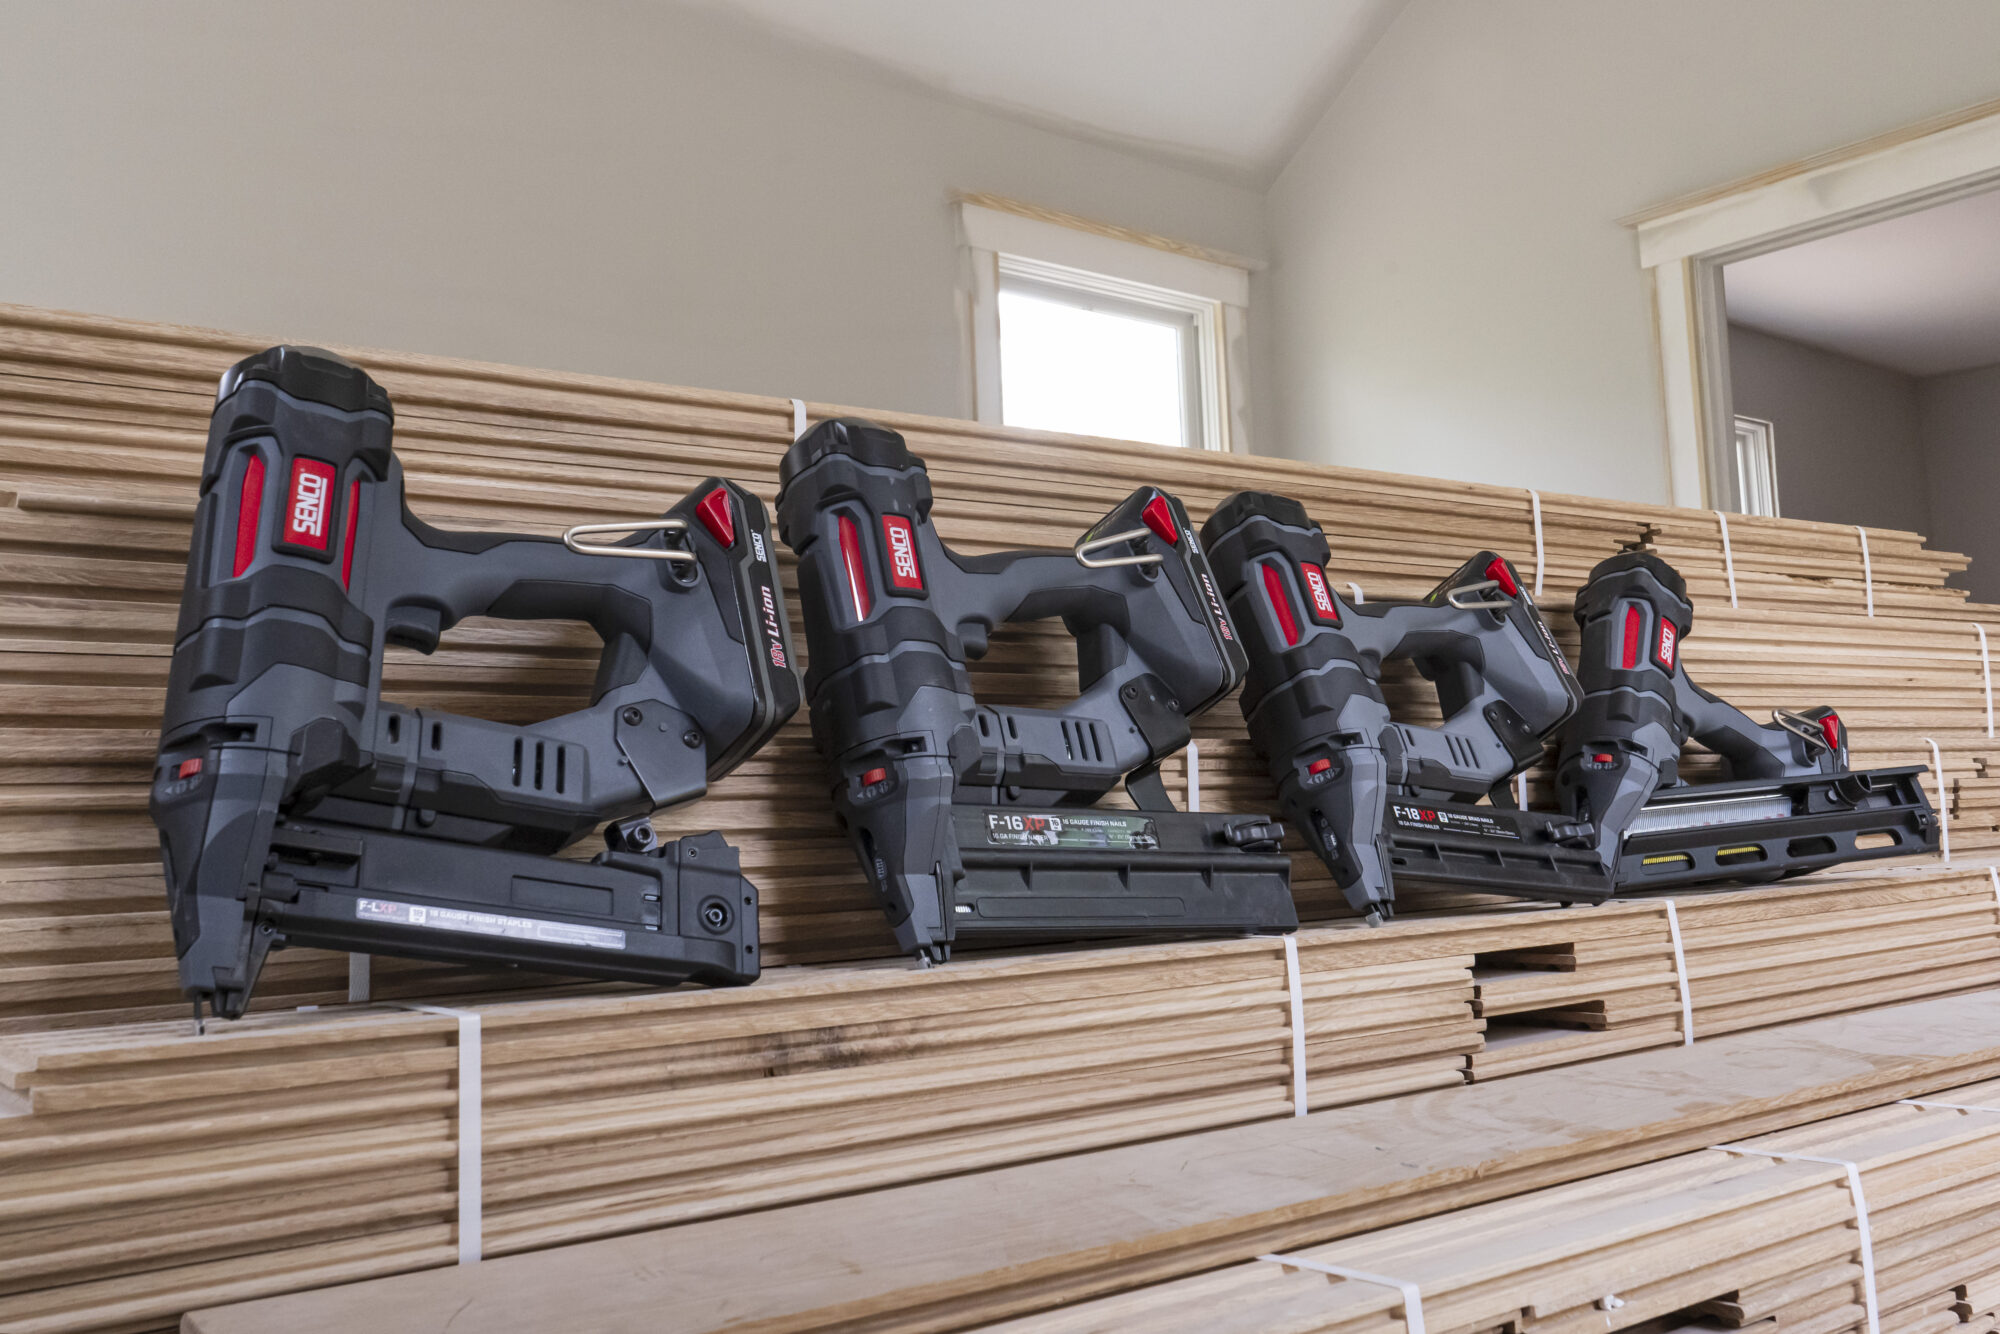 SENCO LAUNCHES SECOND GENERATION OF CORDLESS FINISH AND TRIM NAILERS